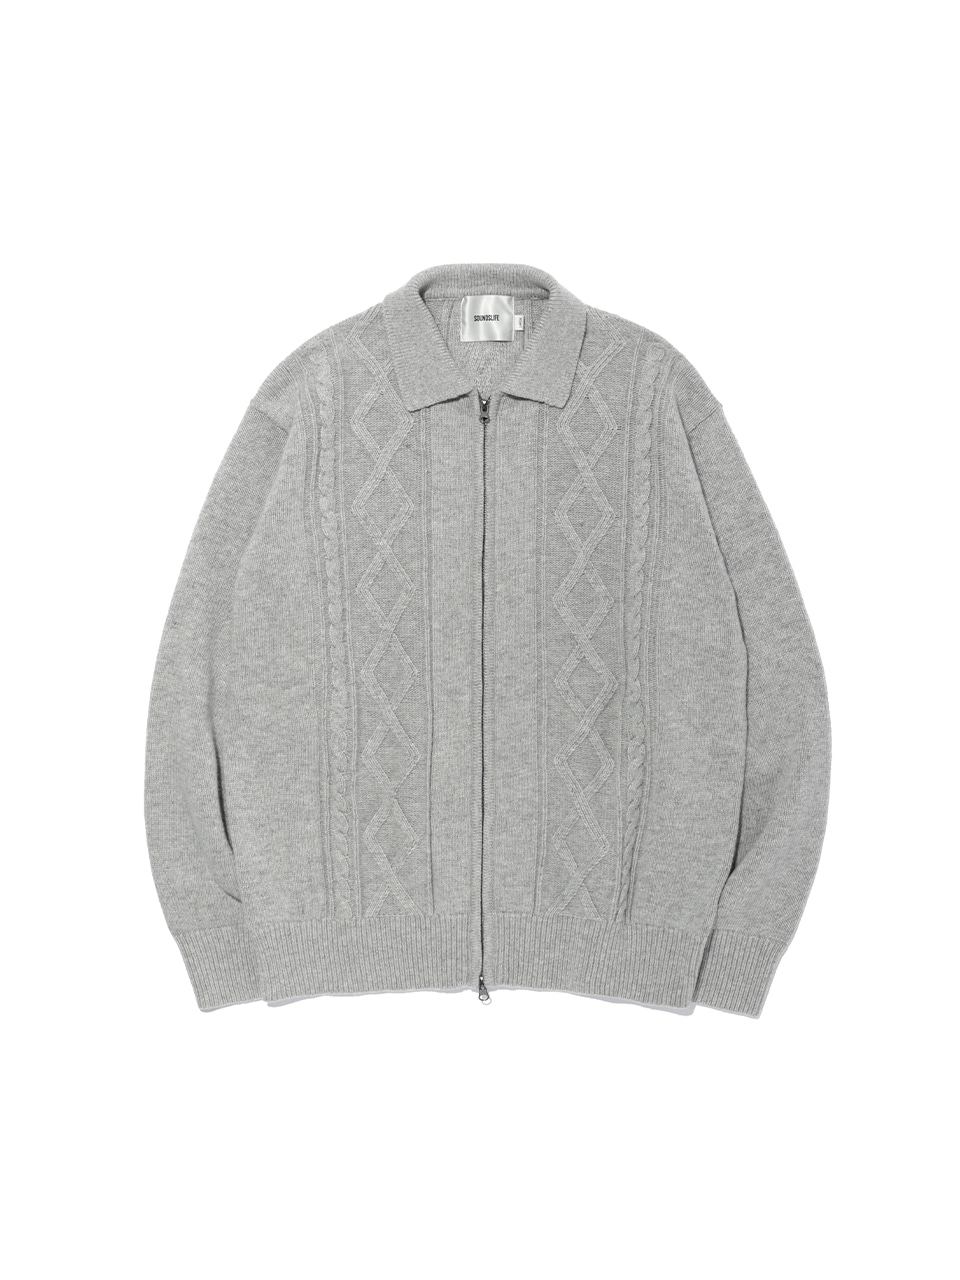 SOUNDSLIFE - ZIGZAG Cable Collar Knit Zip-Up Light Grey